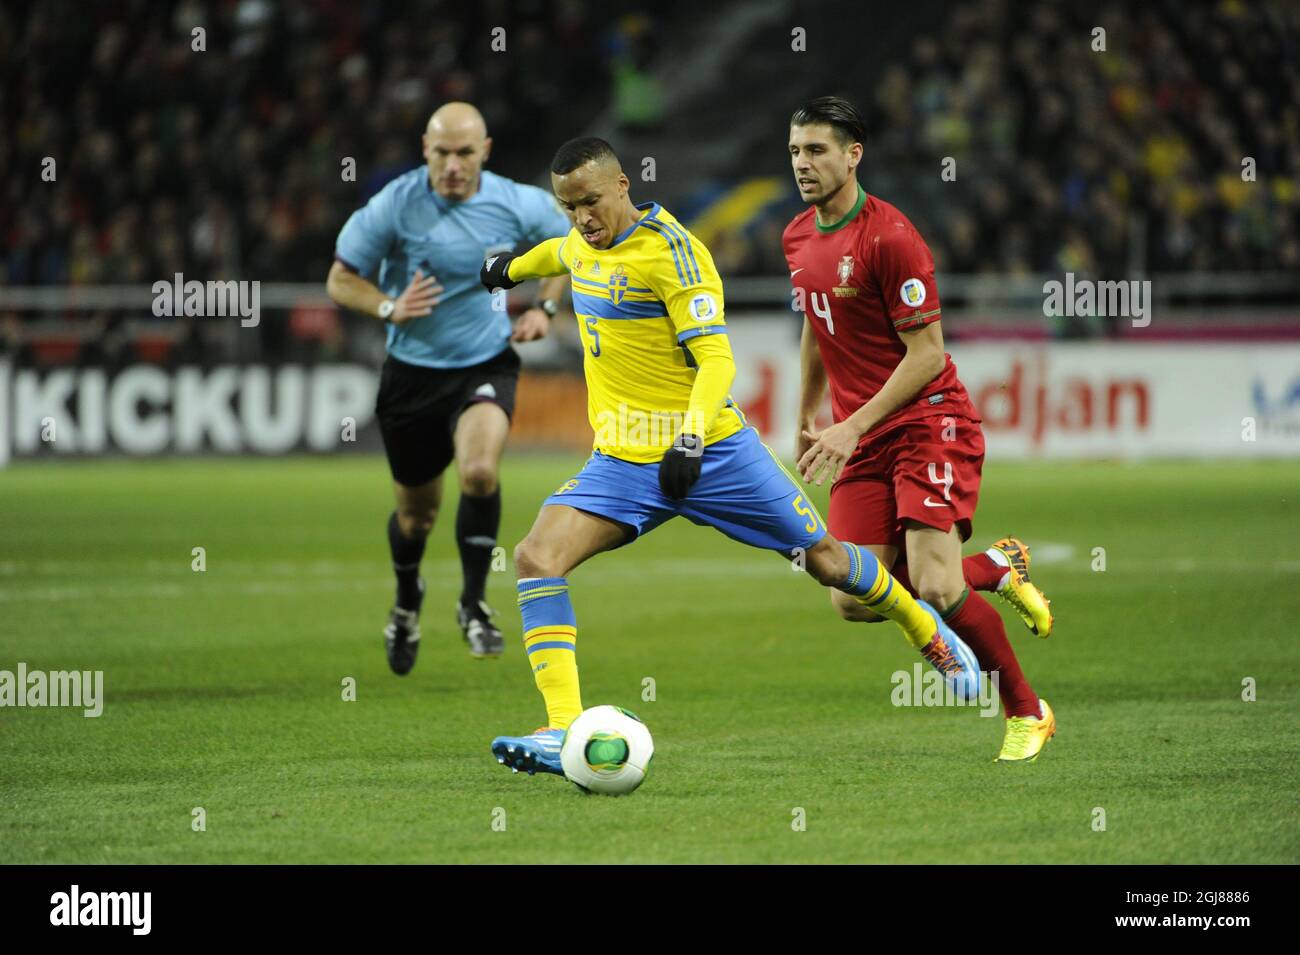 Sweden's Martin Olsson (L) is chased by Portugals Miguel Veloso during the FIFA World Cup 2014 qualifying playoff second leg soccer match between Sweden and Portugal at Friends Arena in Stockholm on Nov. 19, 2013. Photo: Erik Martensson / TT / code 10400 Stock Photo